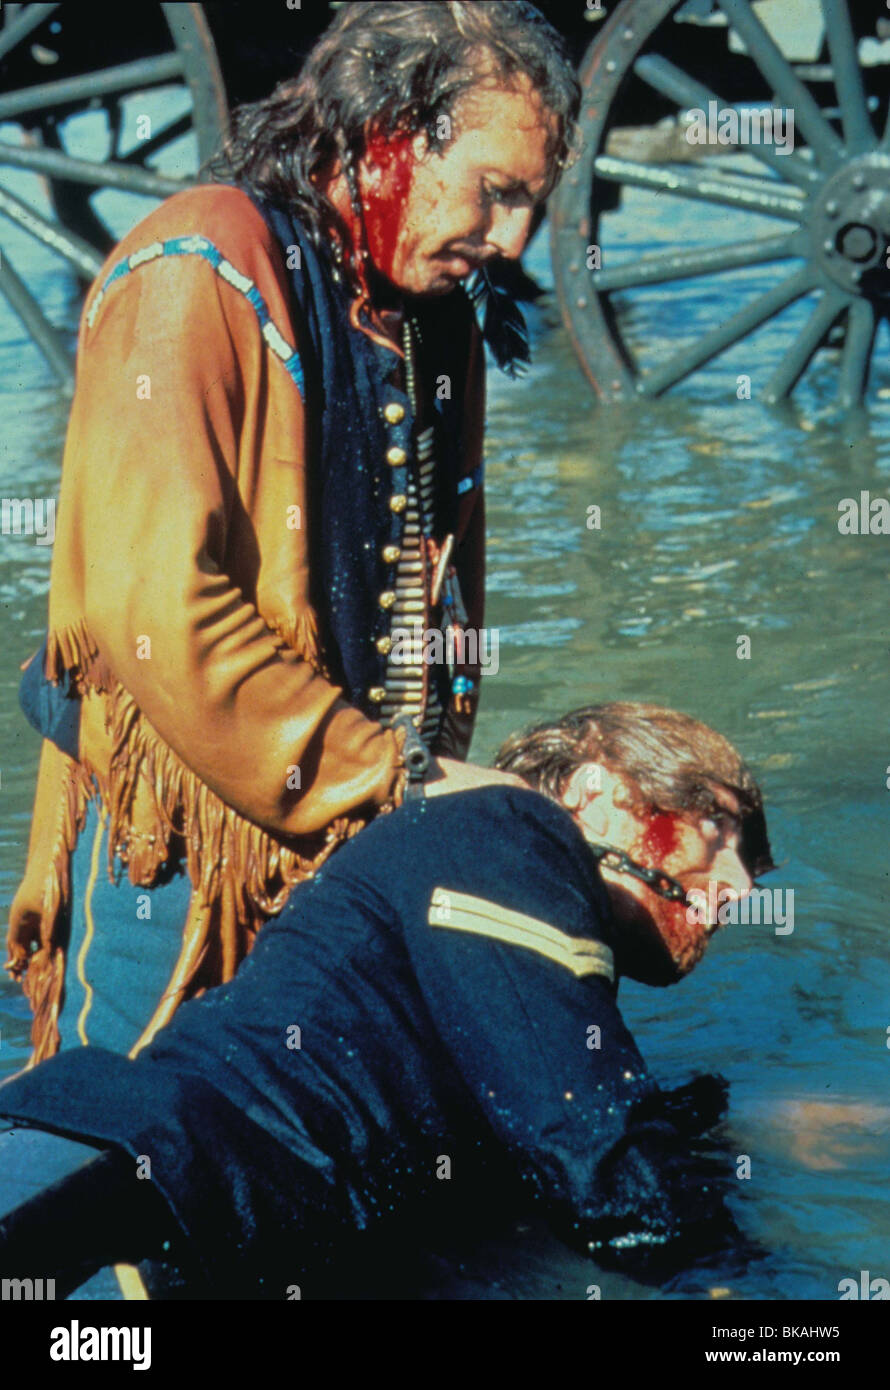 DANCES WITH WOLVES (1990) KEVIN COSTNER DWW 006 Stock Photo